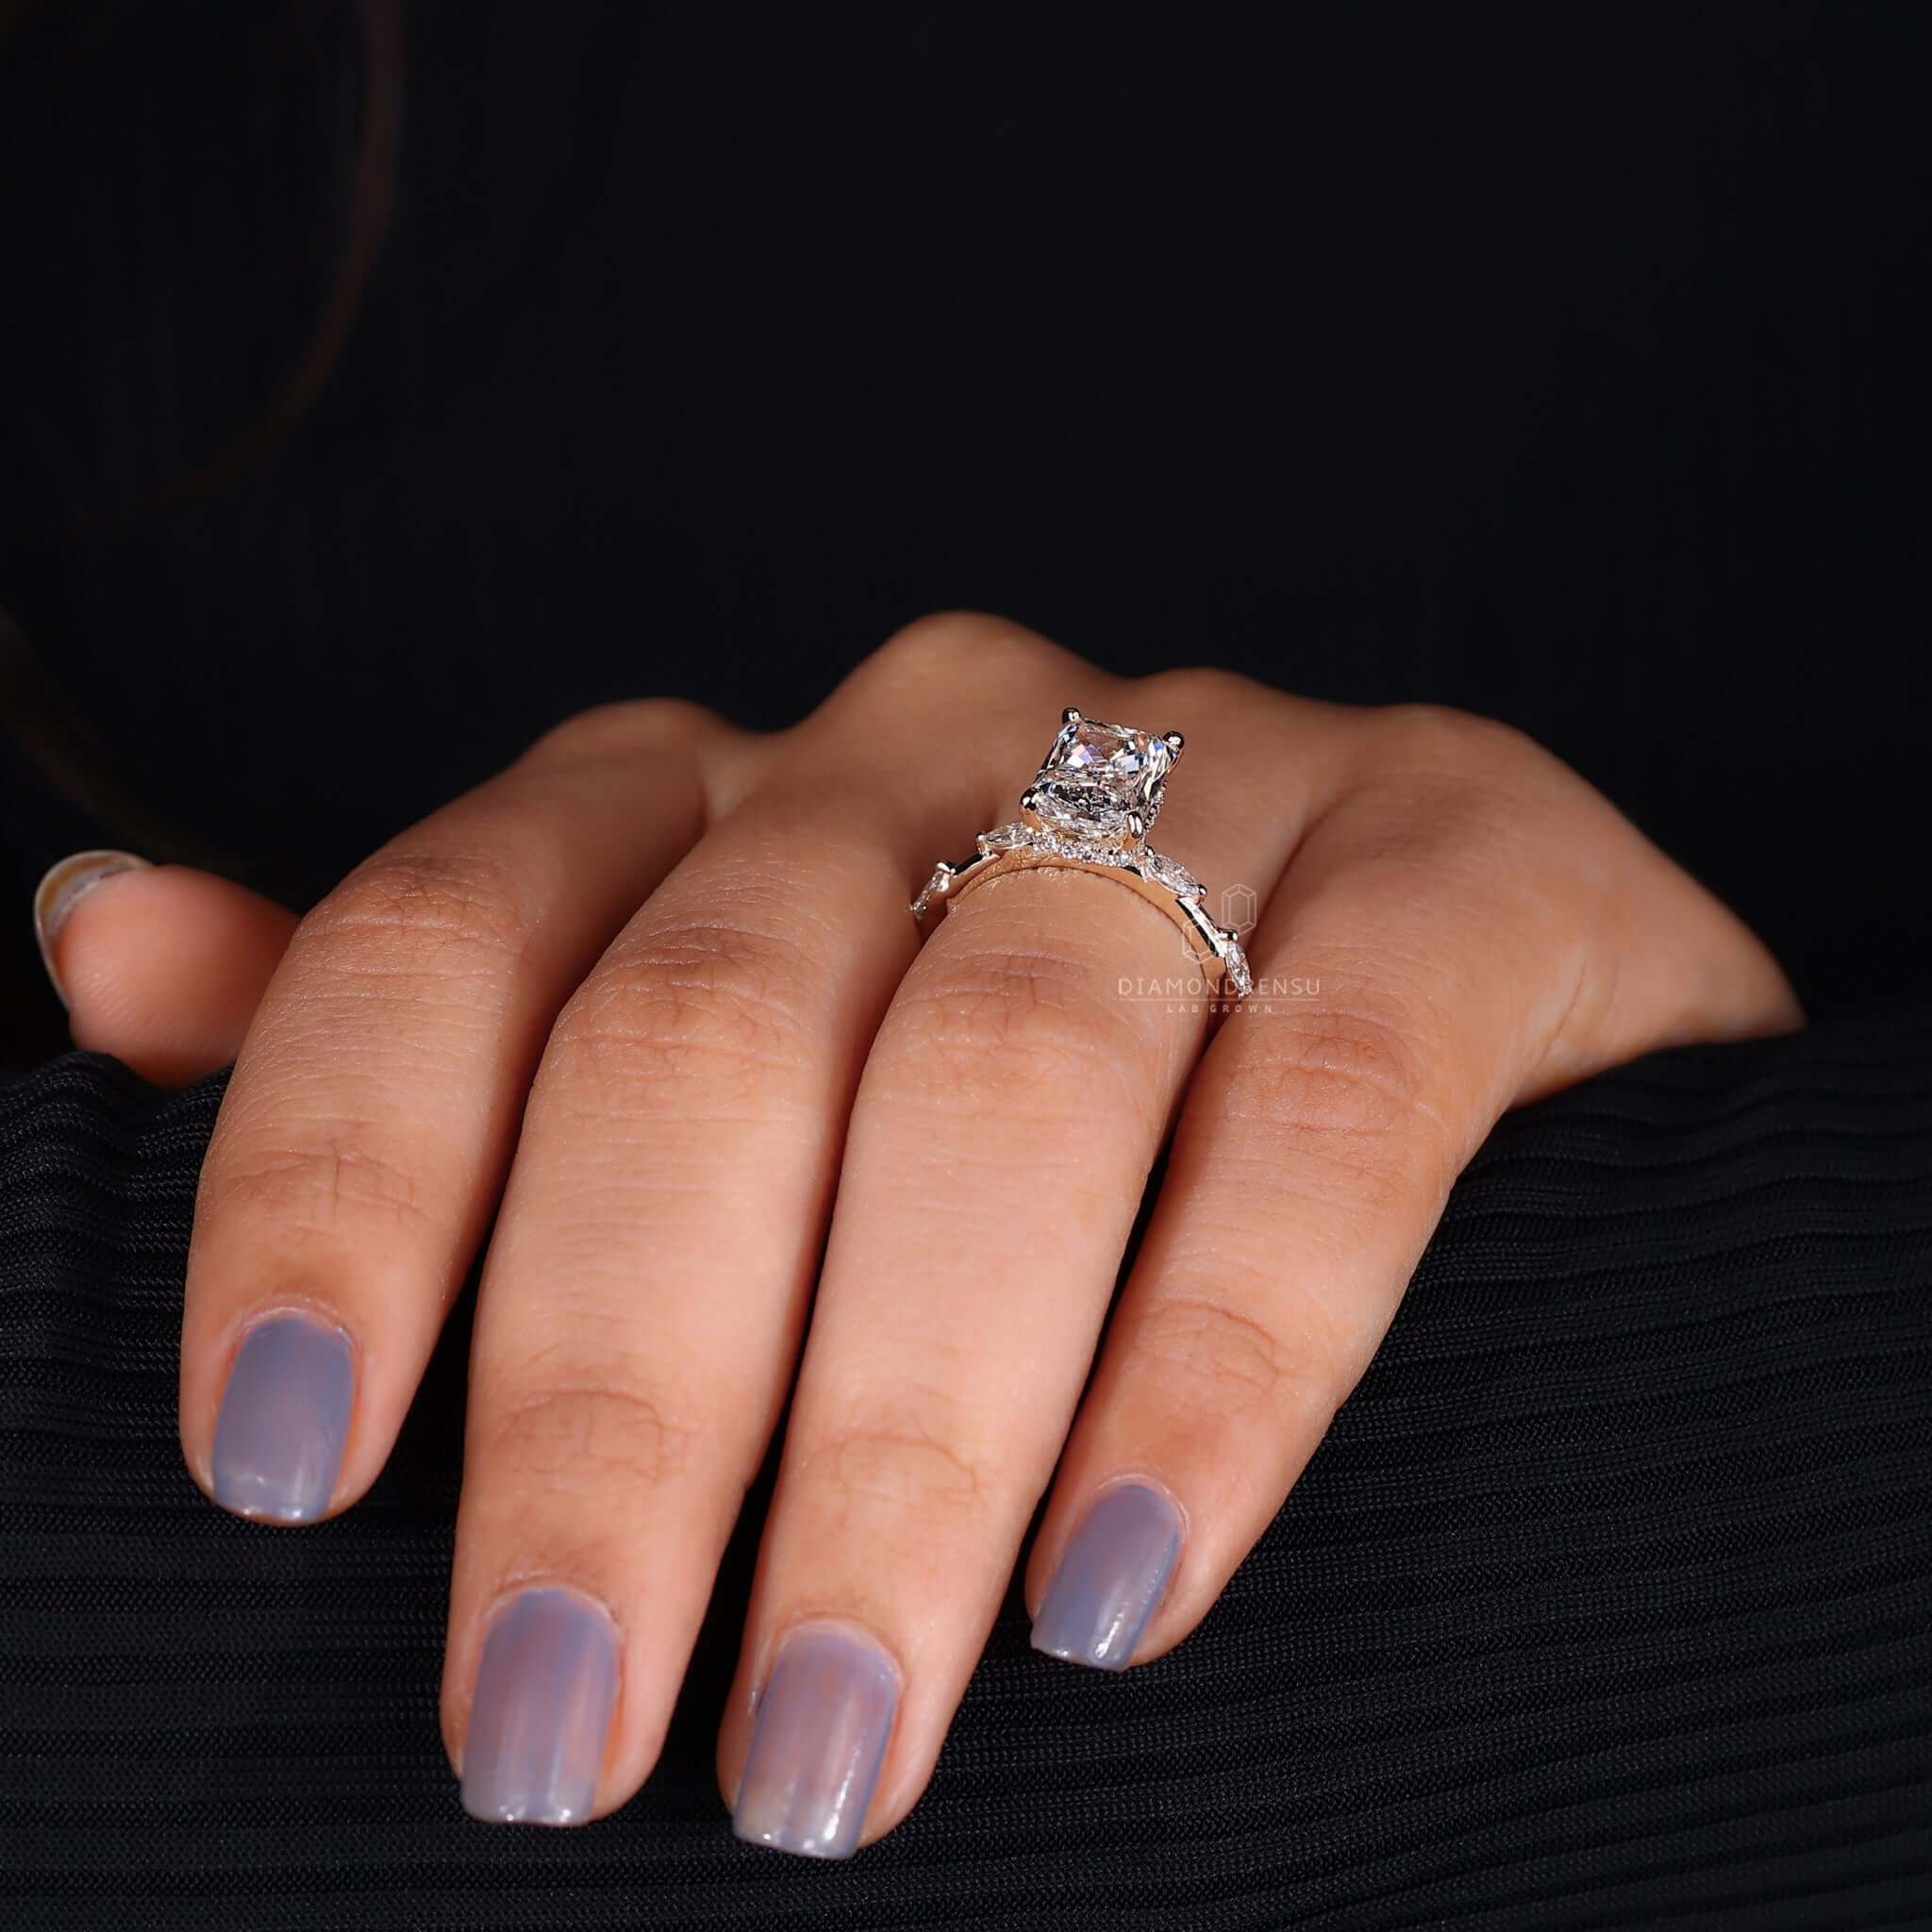 Modern Distance Pave Ring on display, featuring a contemporary design with intricate details.